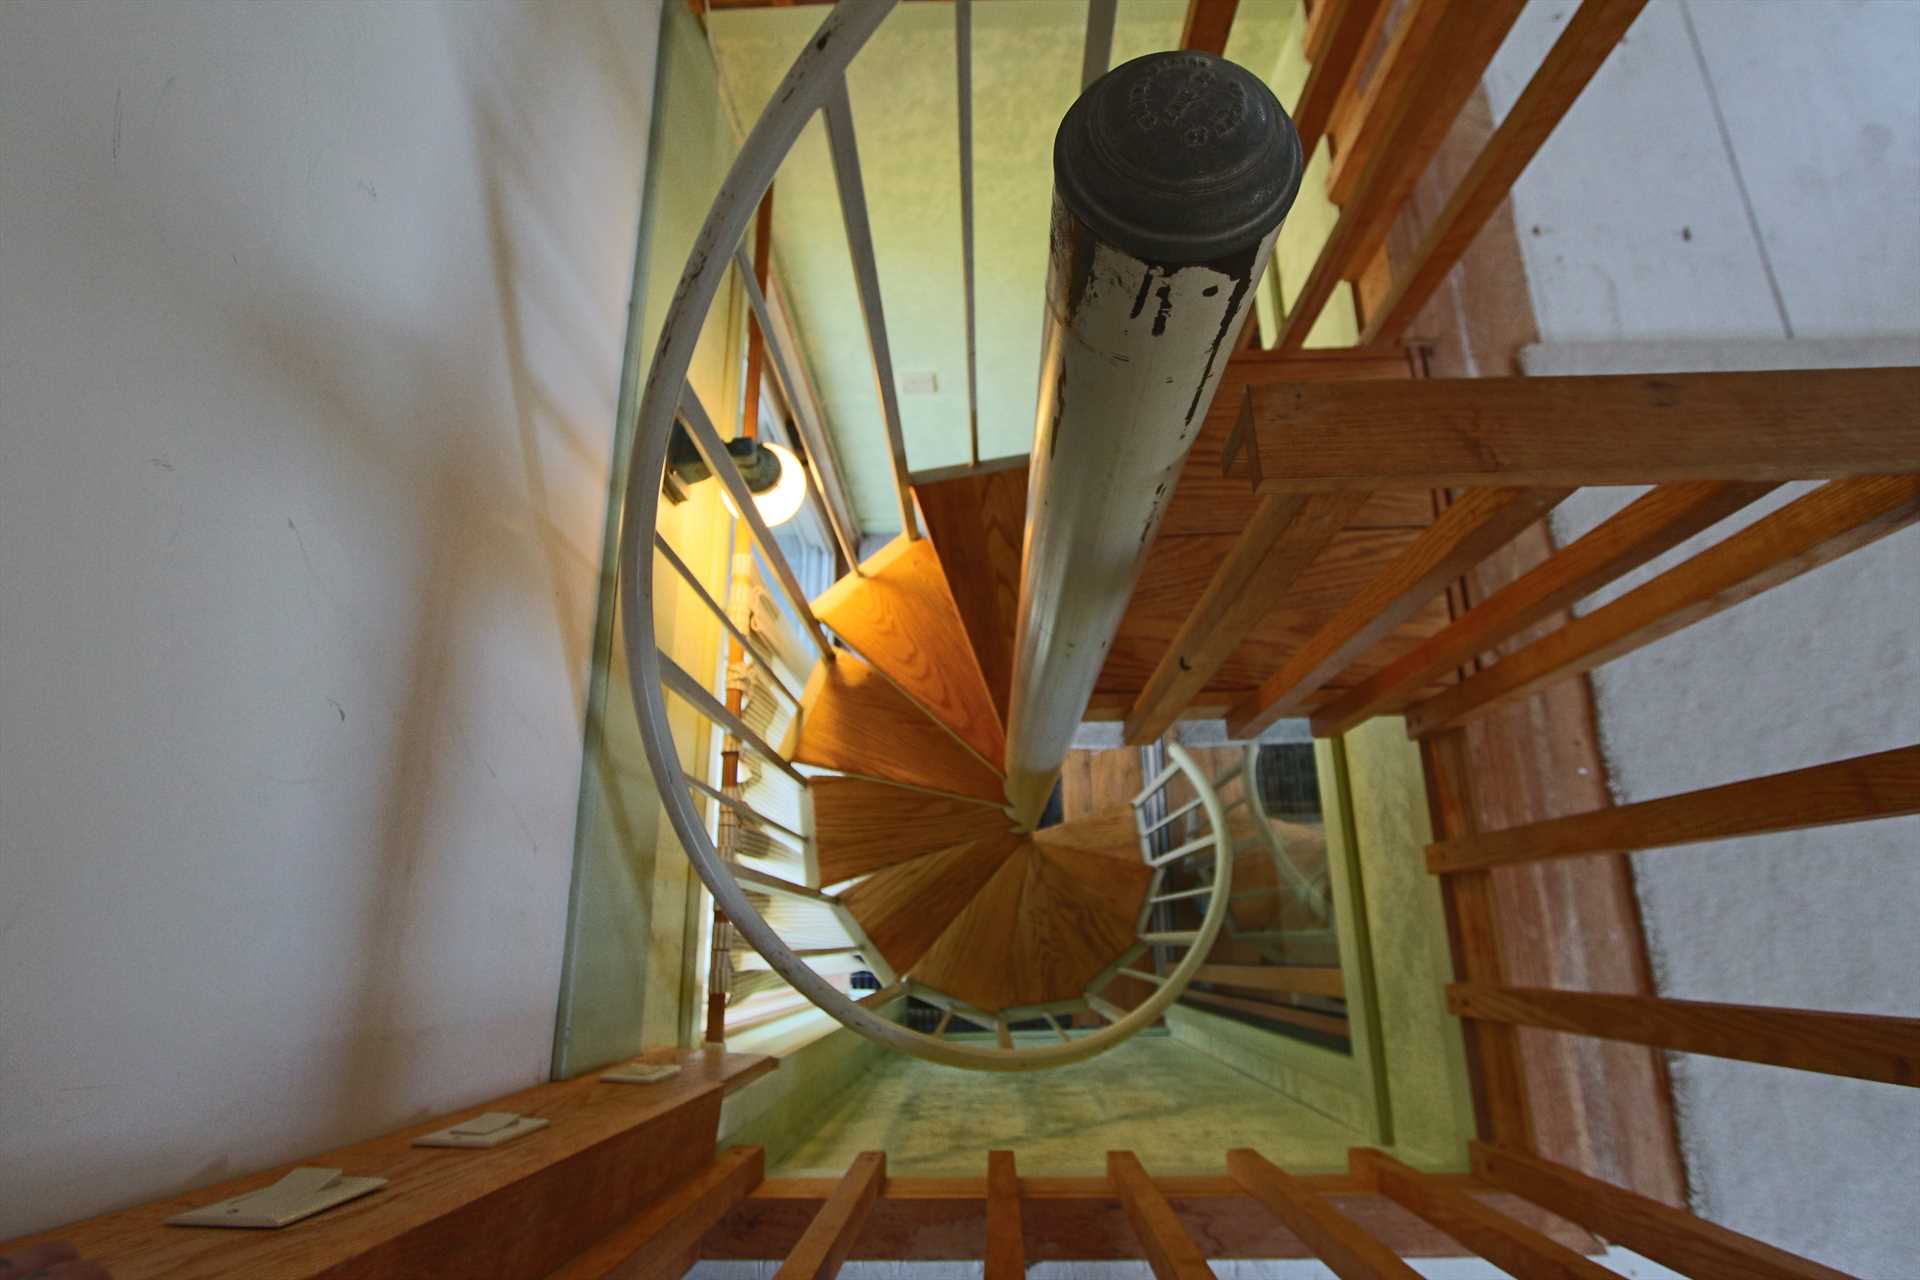 Spiral staircase to Bedroom #2